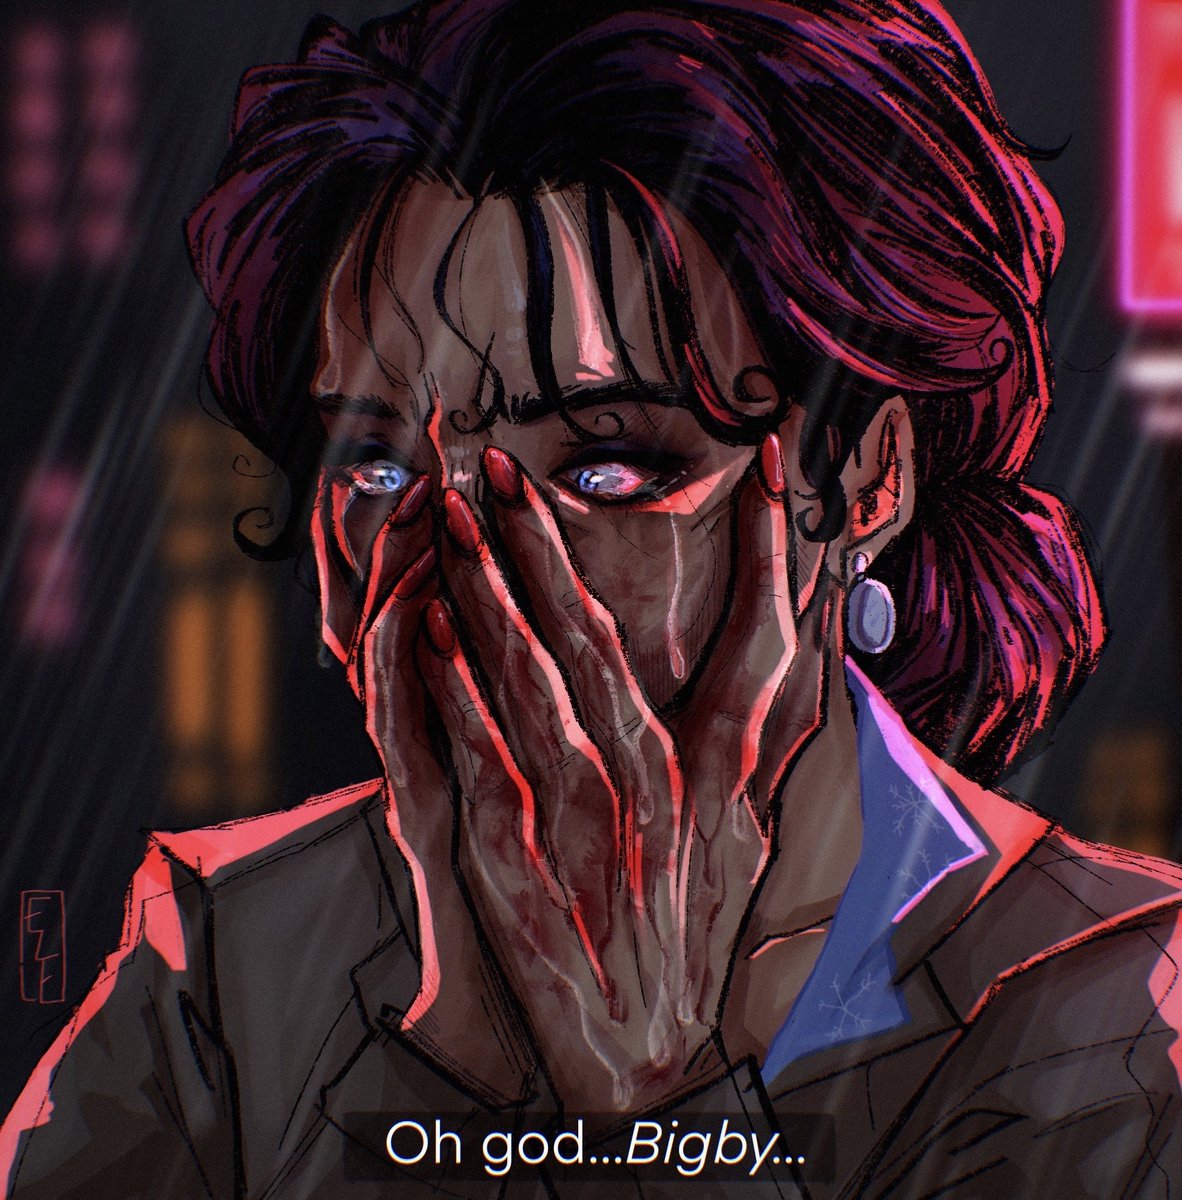 replaying twau got me wanting to draw something from the alley scene, this and the sketch is up on my insta, but here you can see her smudged makeup and the blood in all its glory
#thewolfamongus #twau